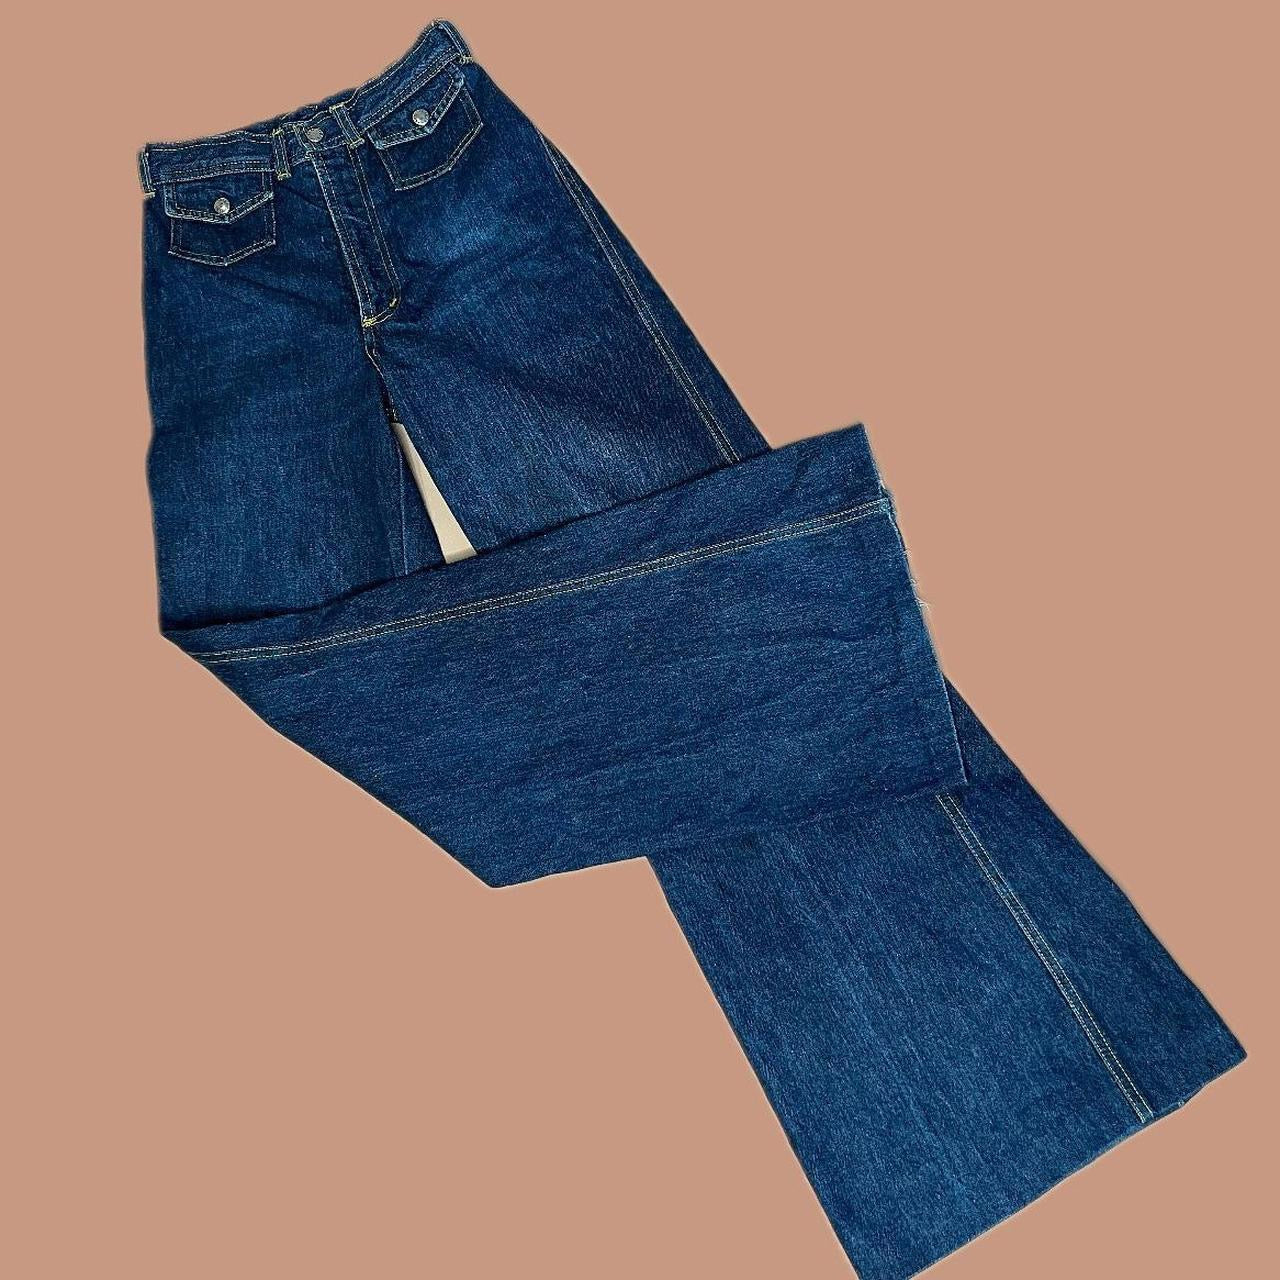 1970s Staggers jeans